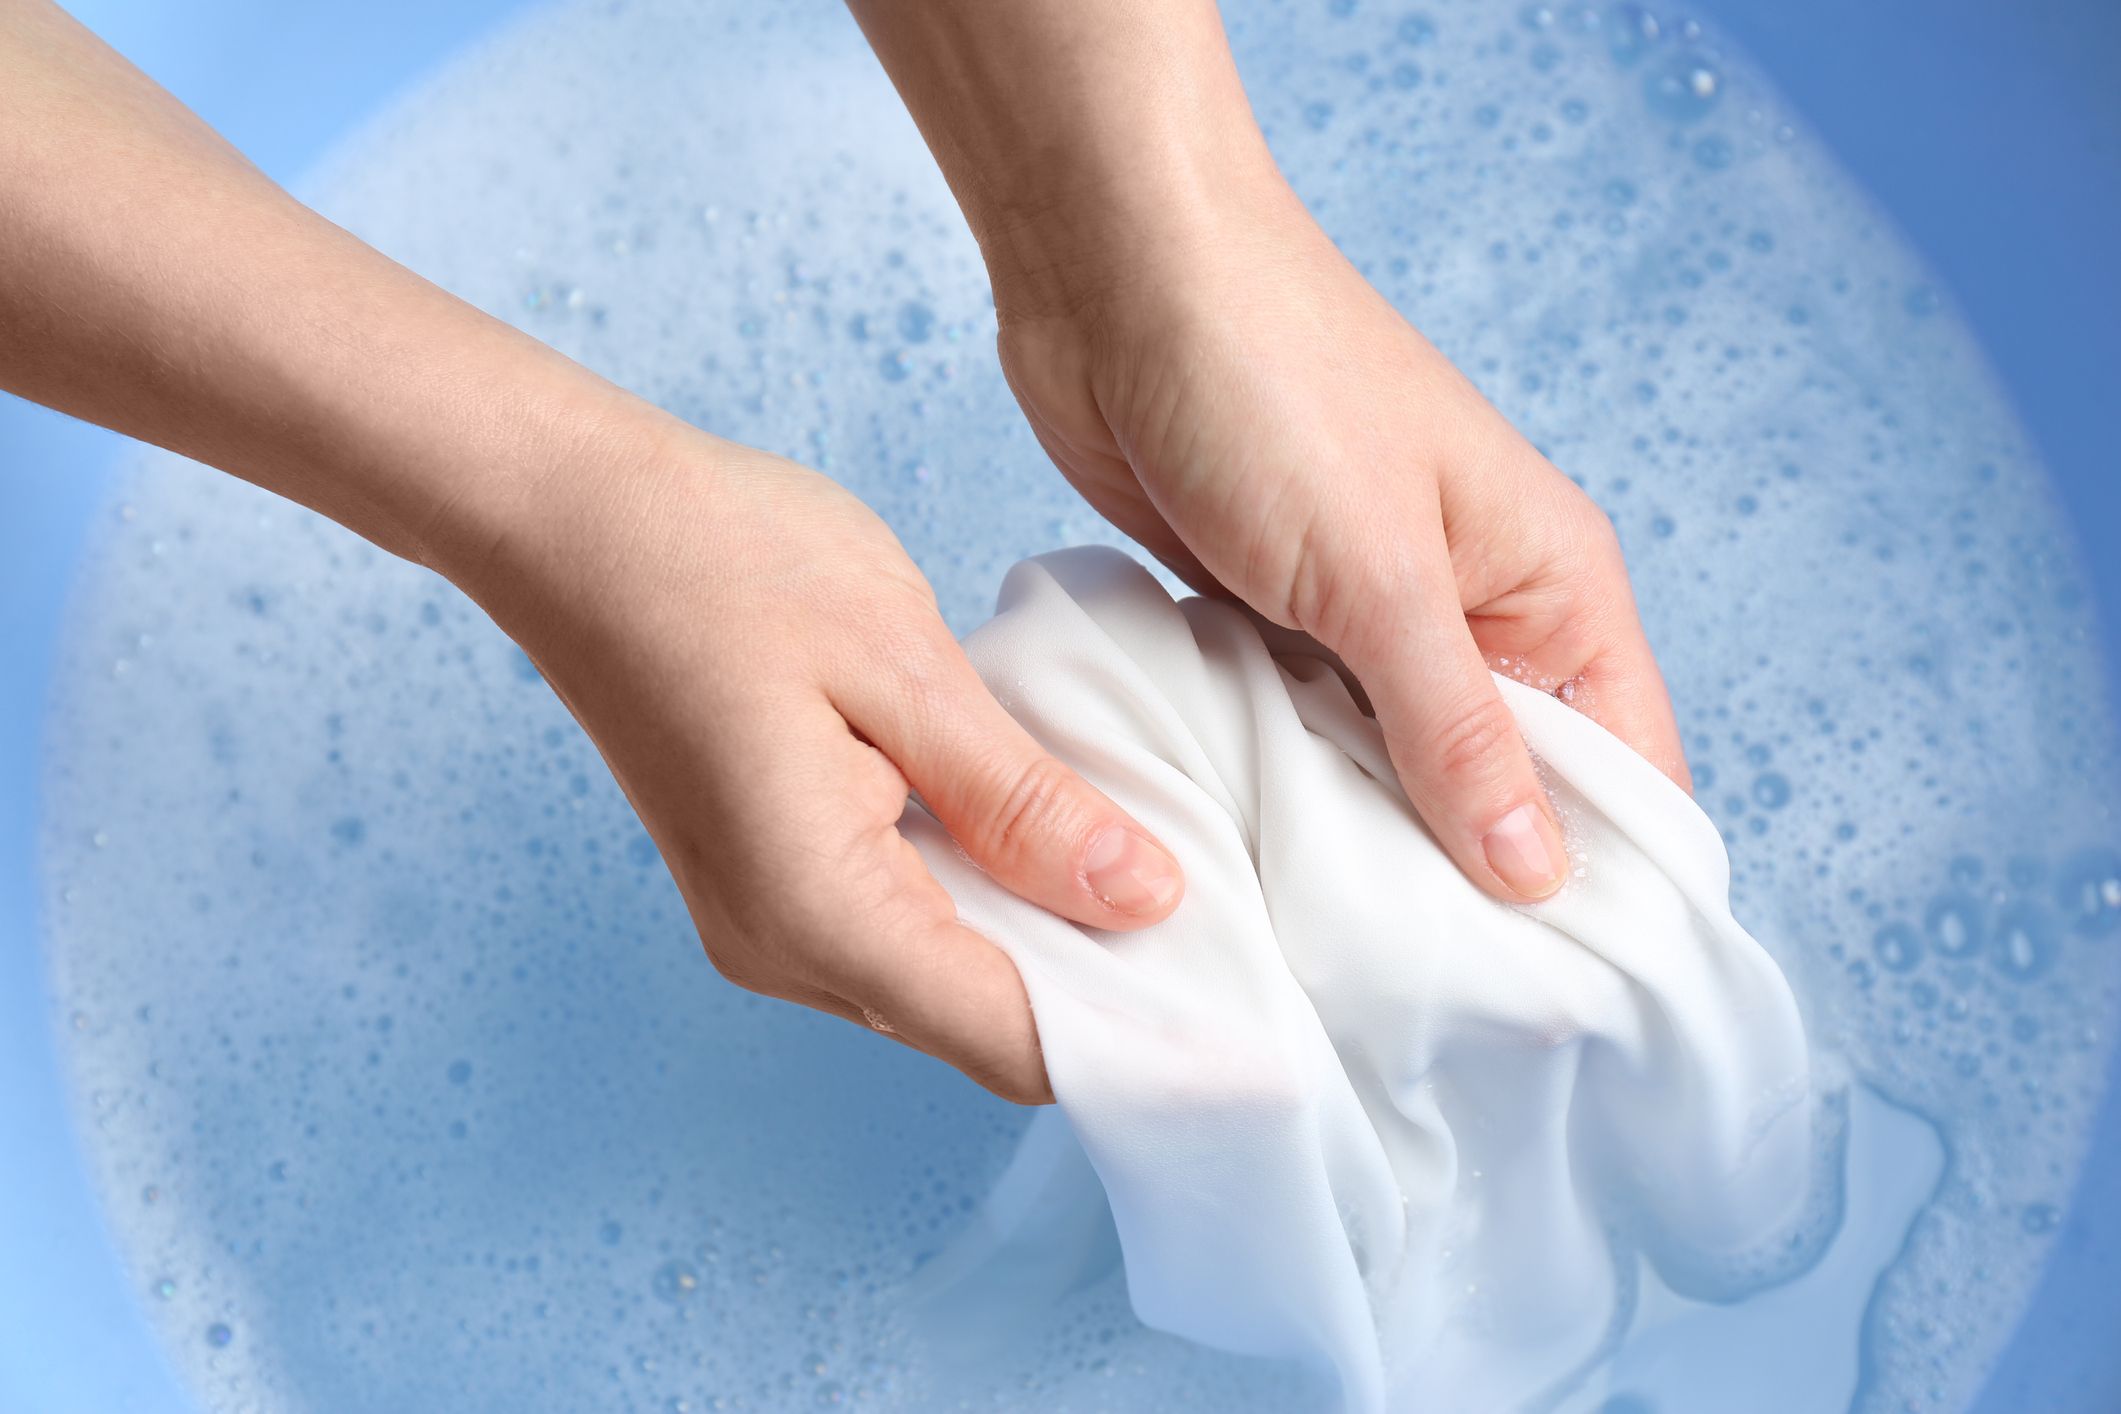 How to Hand Wash Clothes the Easy Way